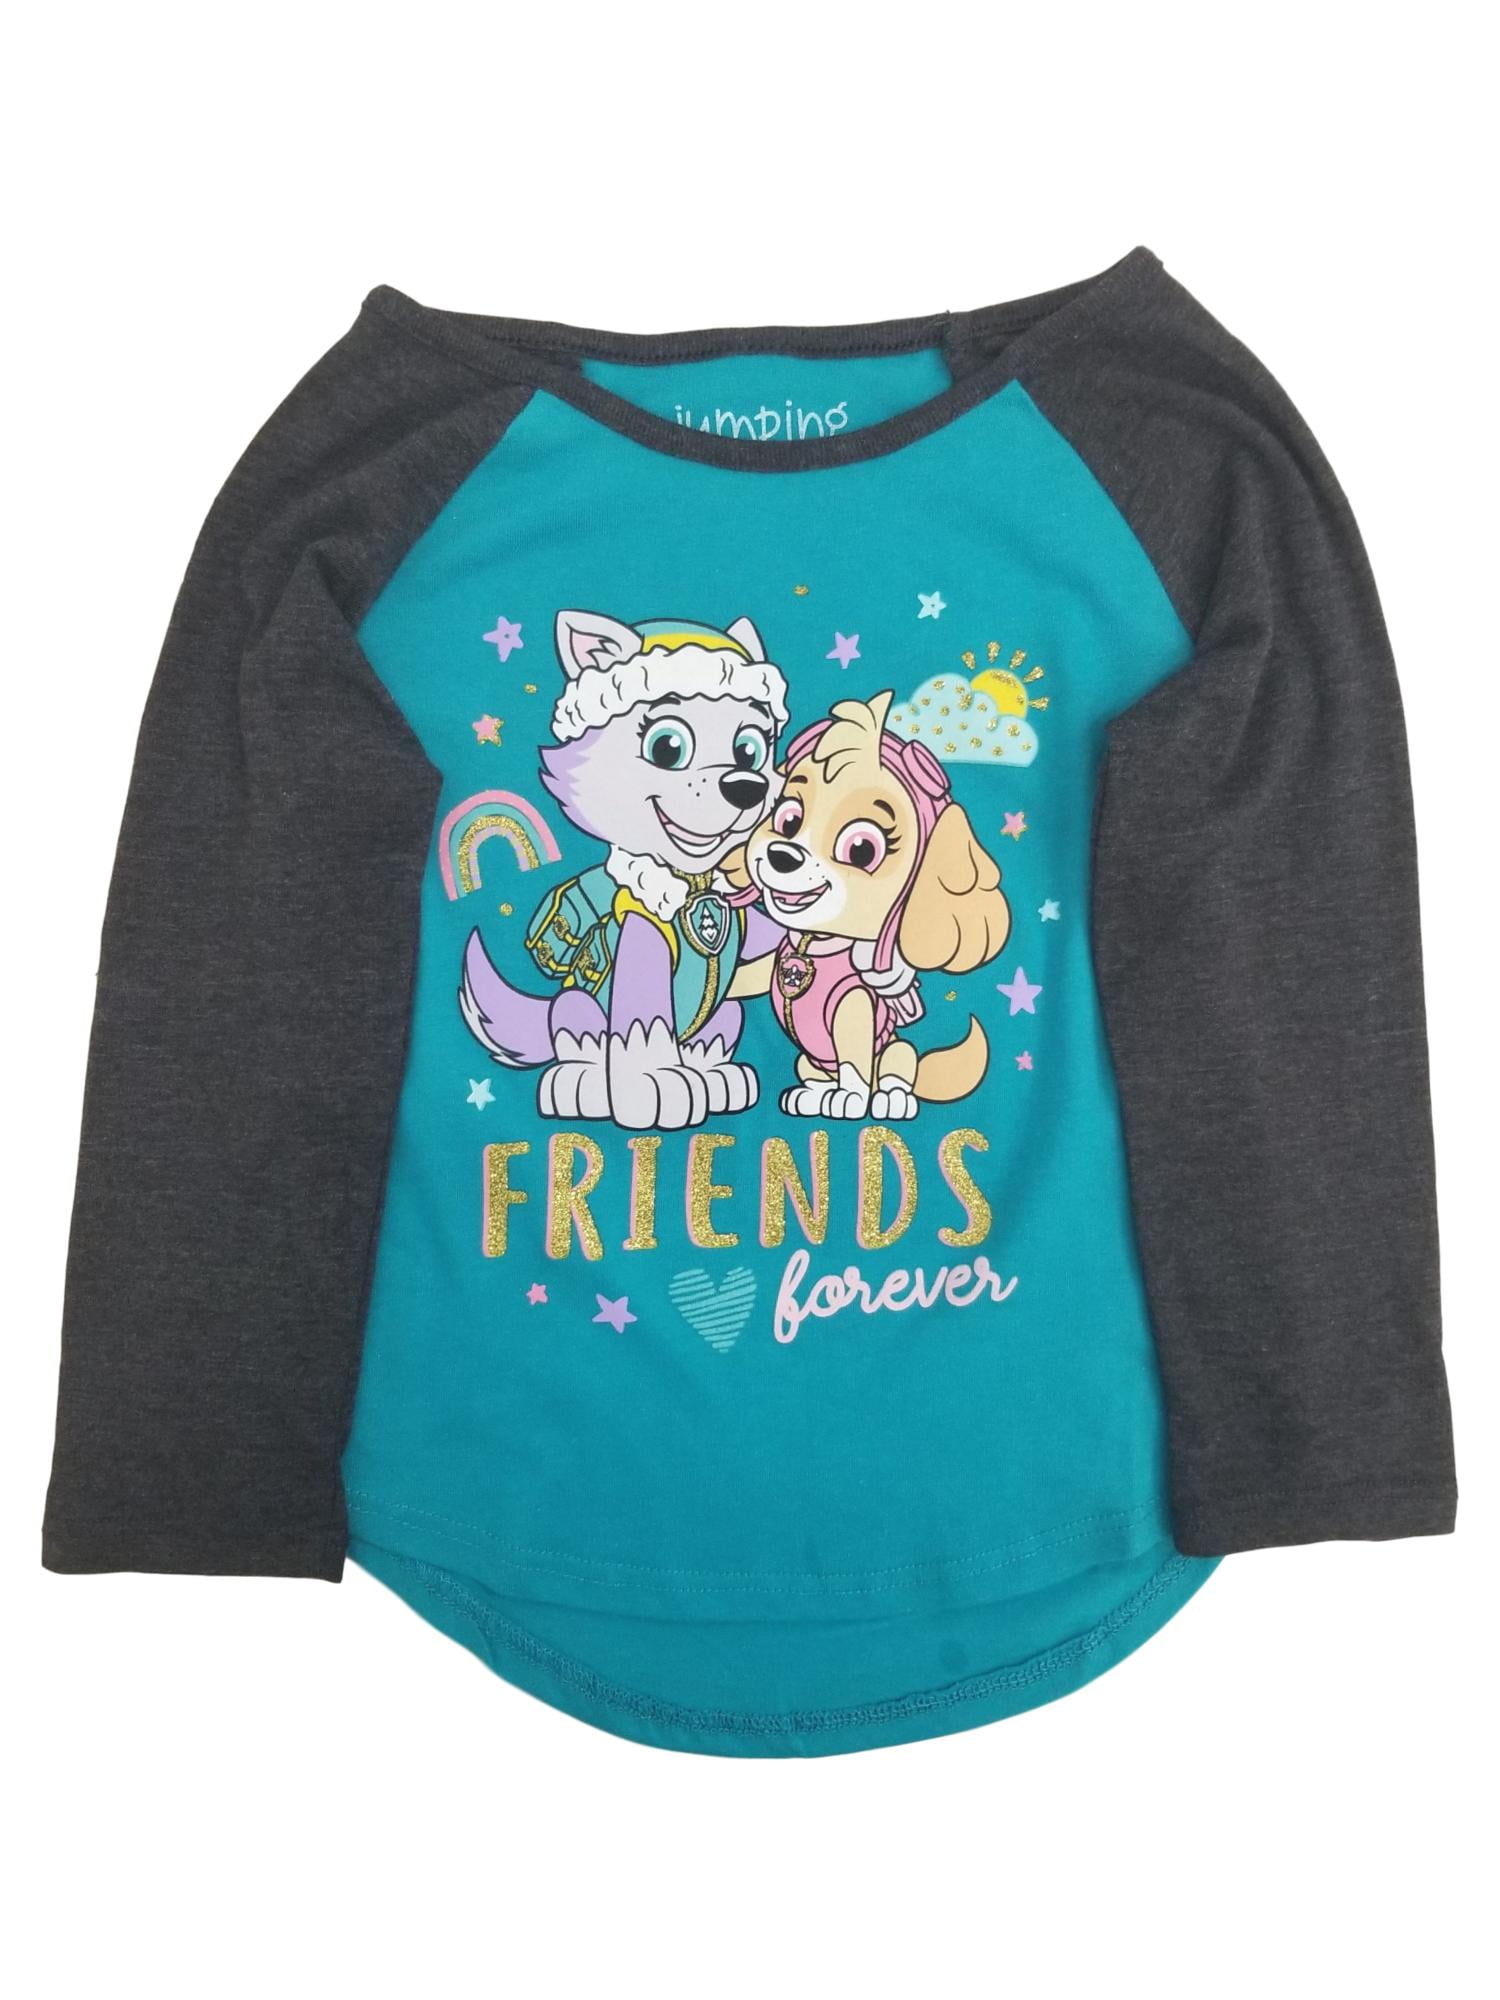 Paw Patrol Skye Big Sister Shirt Outfit Gift Toddler Kids Girls/' Fitted T-Shirt